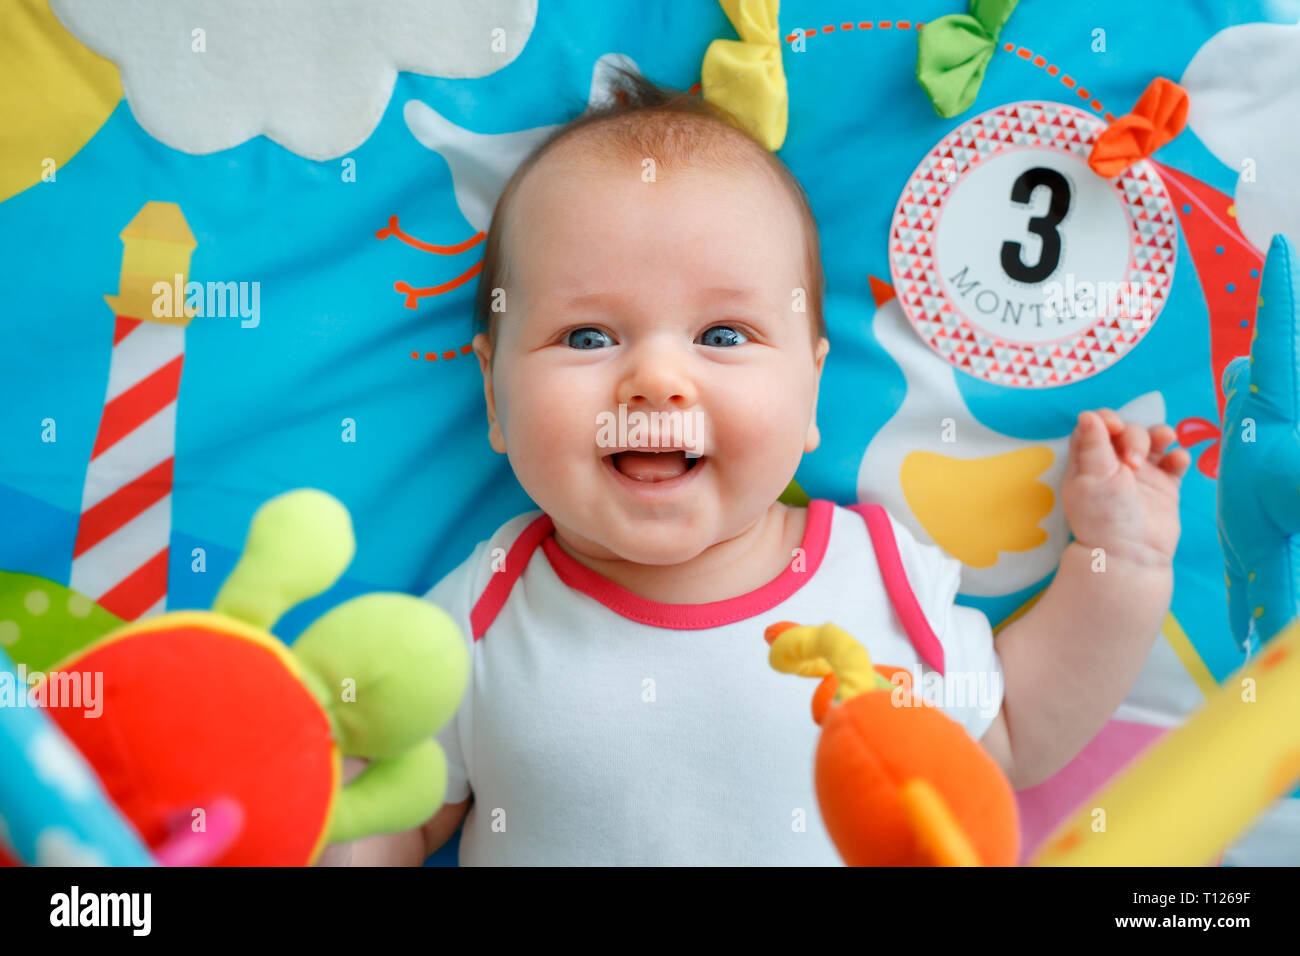 Adorable baby girl having fun with toys on colorful play mat. Happy healthy kid playing on the floor Stock Photo